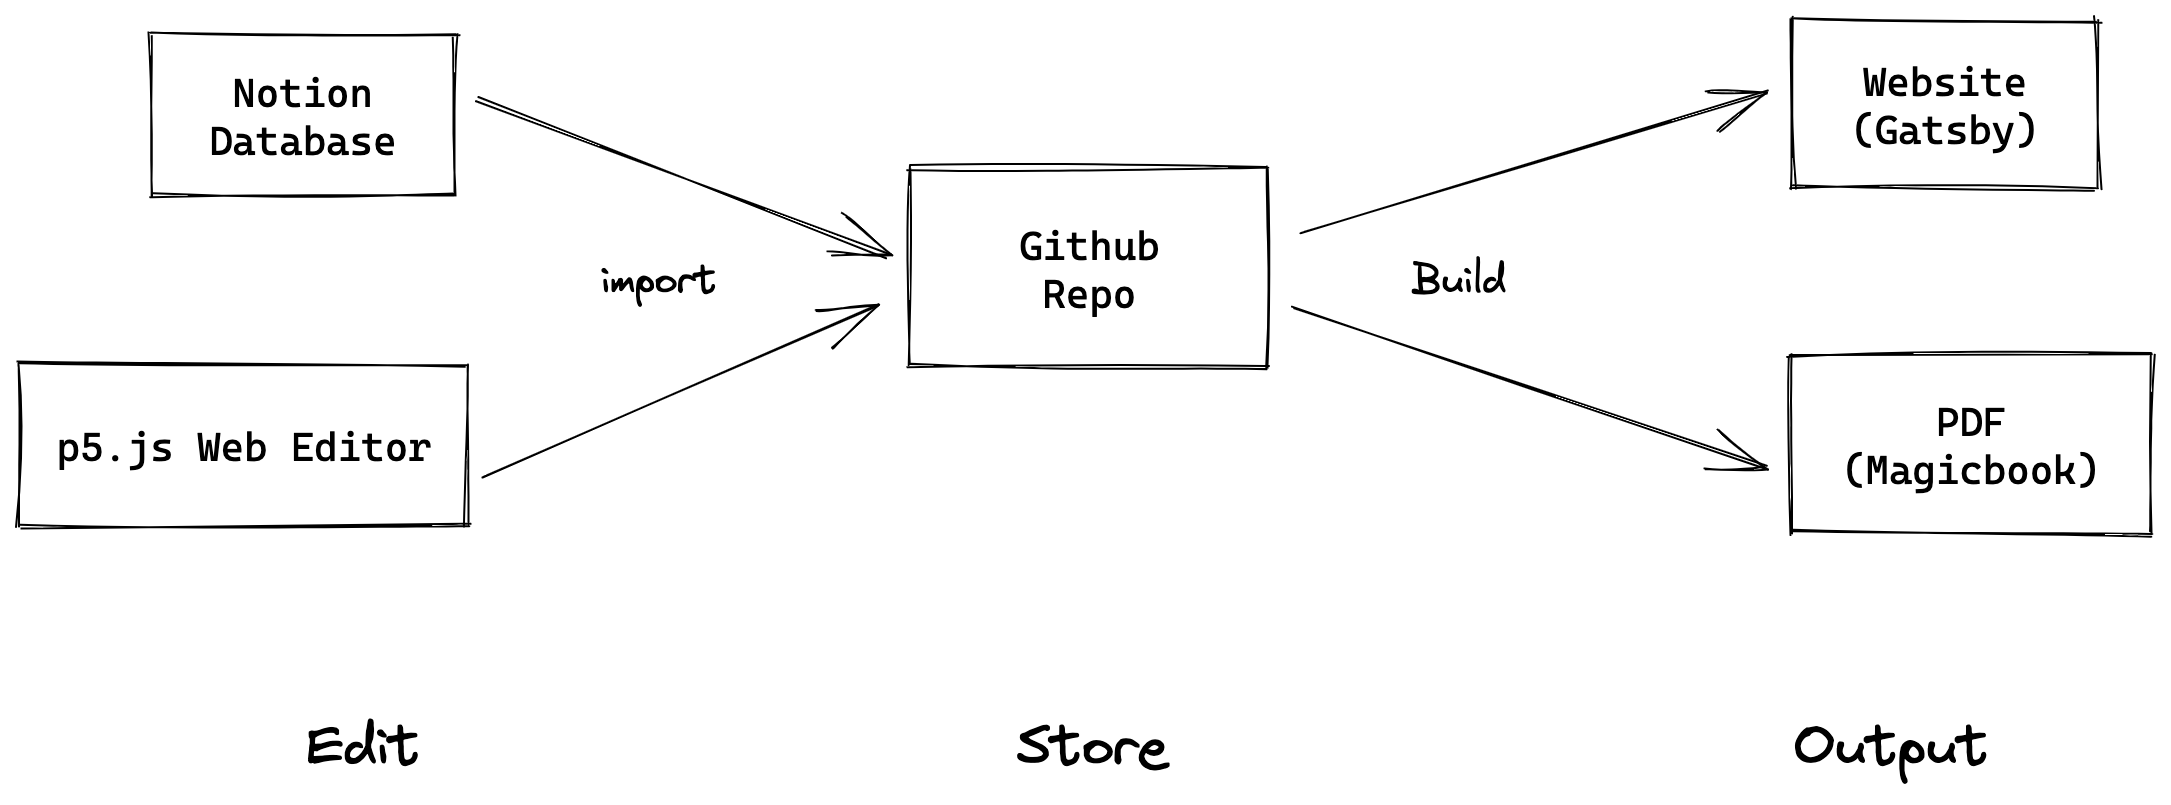 Data flow chart showing three parts: edit, store, and output.